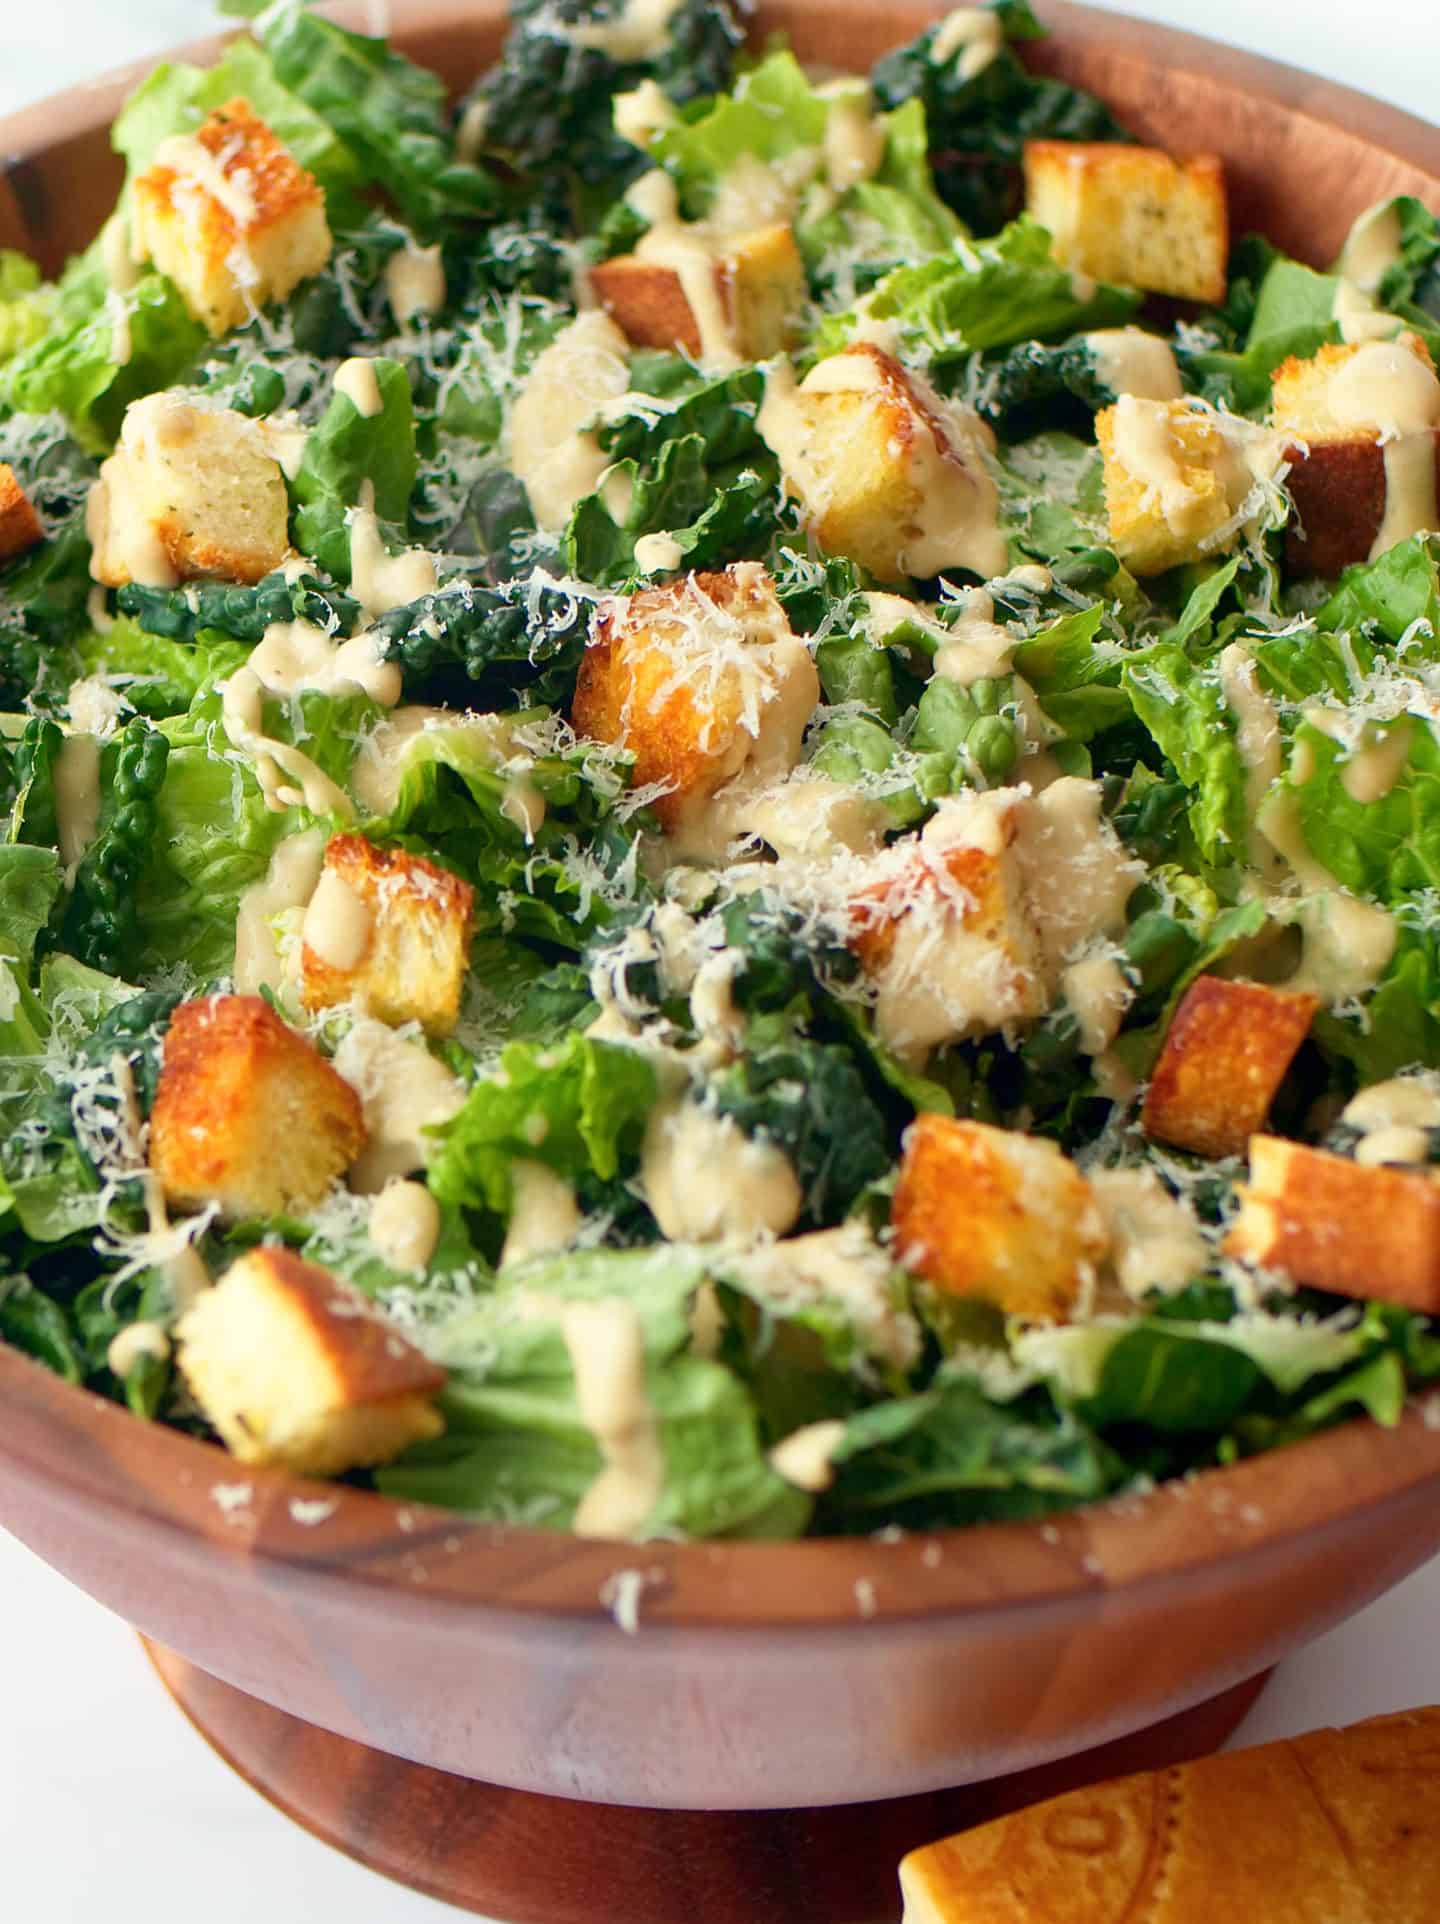 Caesar Salad arranged in wooden bowl with dressing and crispy croutons.